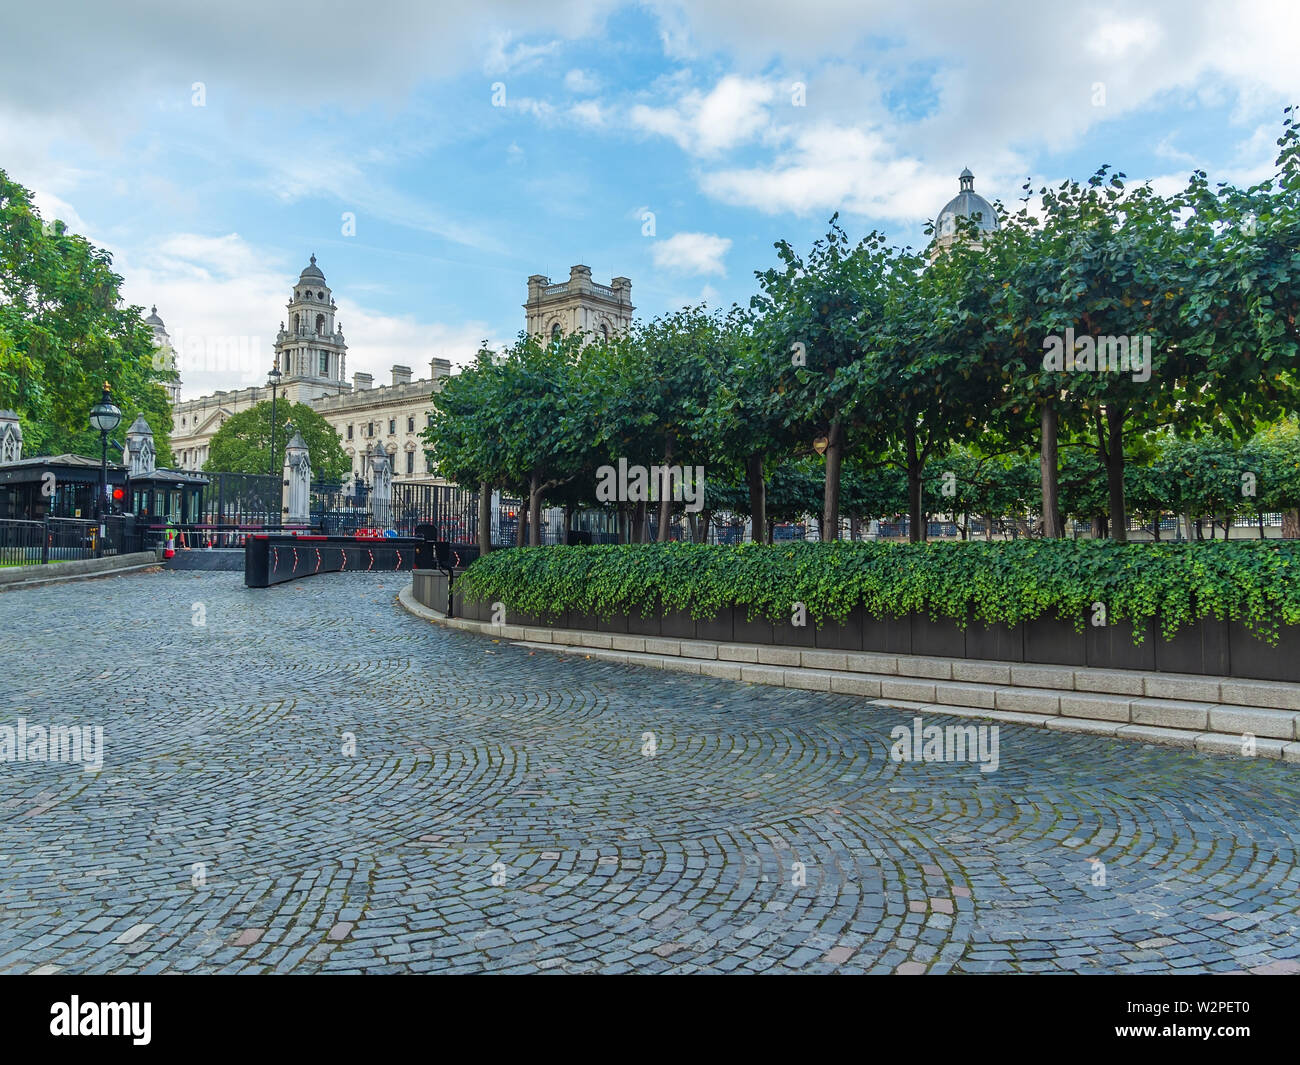 View of the New Palace Yard and the garden of the Westminster Palace and the Houses of Parliament, London, UK. Stock Photo